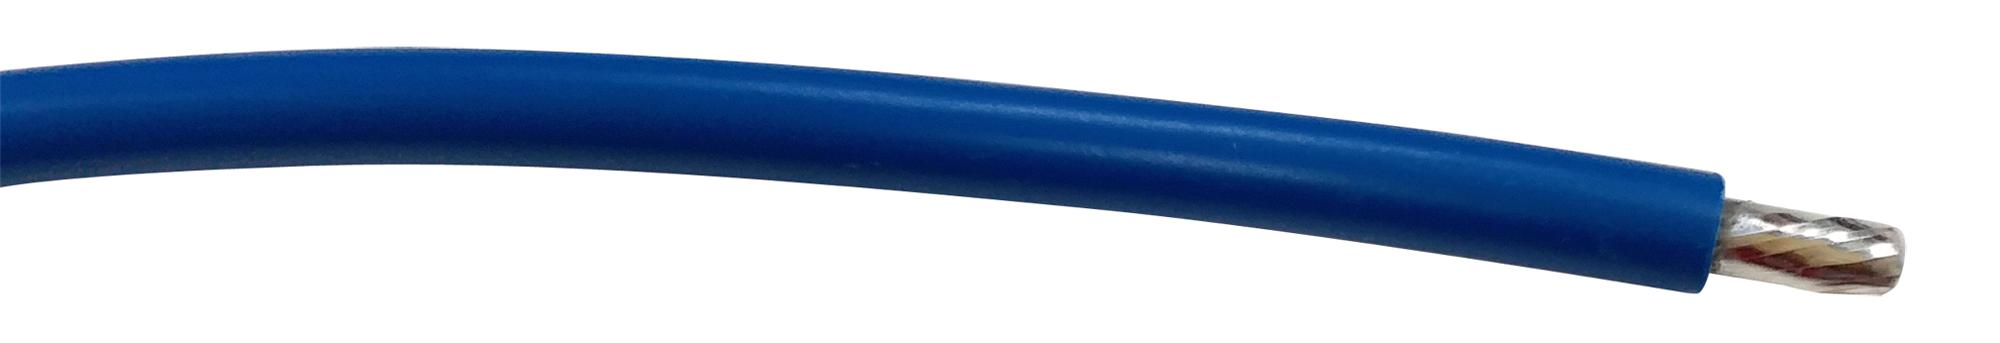 PP002496 CABLE WIRE, 20AWG, BLUE, 305M PRO POWER